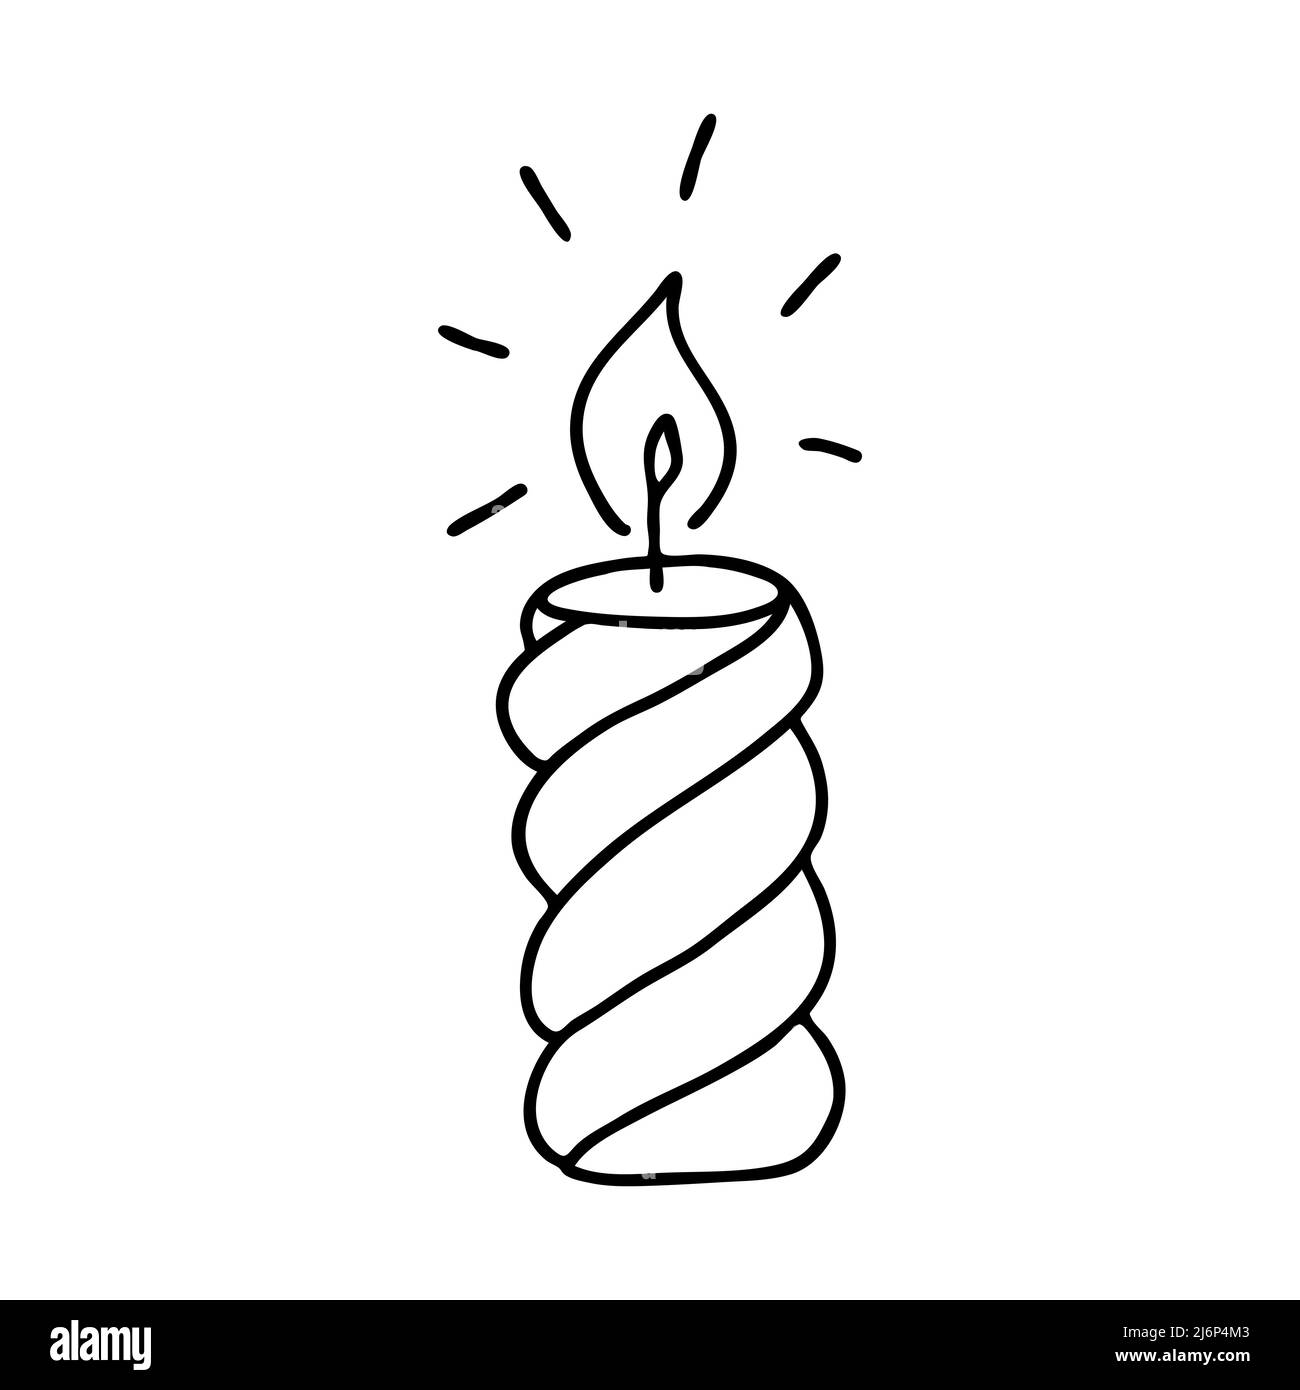 44391 Candle Sketch Images Stock Photos  Vectors  Shutterstock